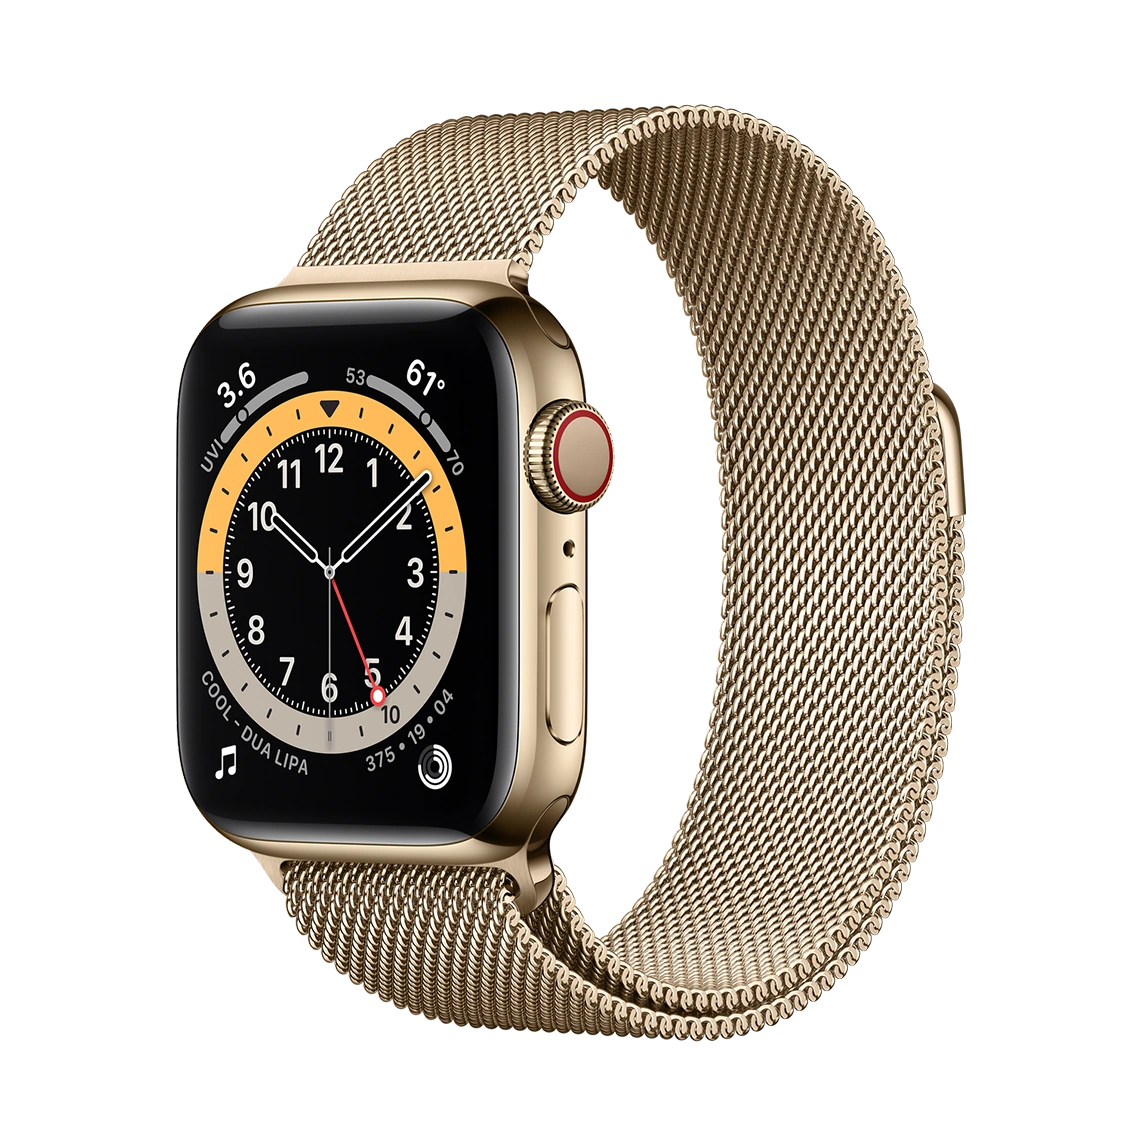 Apple Watch Series 6 Gold Stainless Steel Case with Milanese Loop